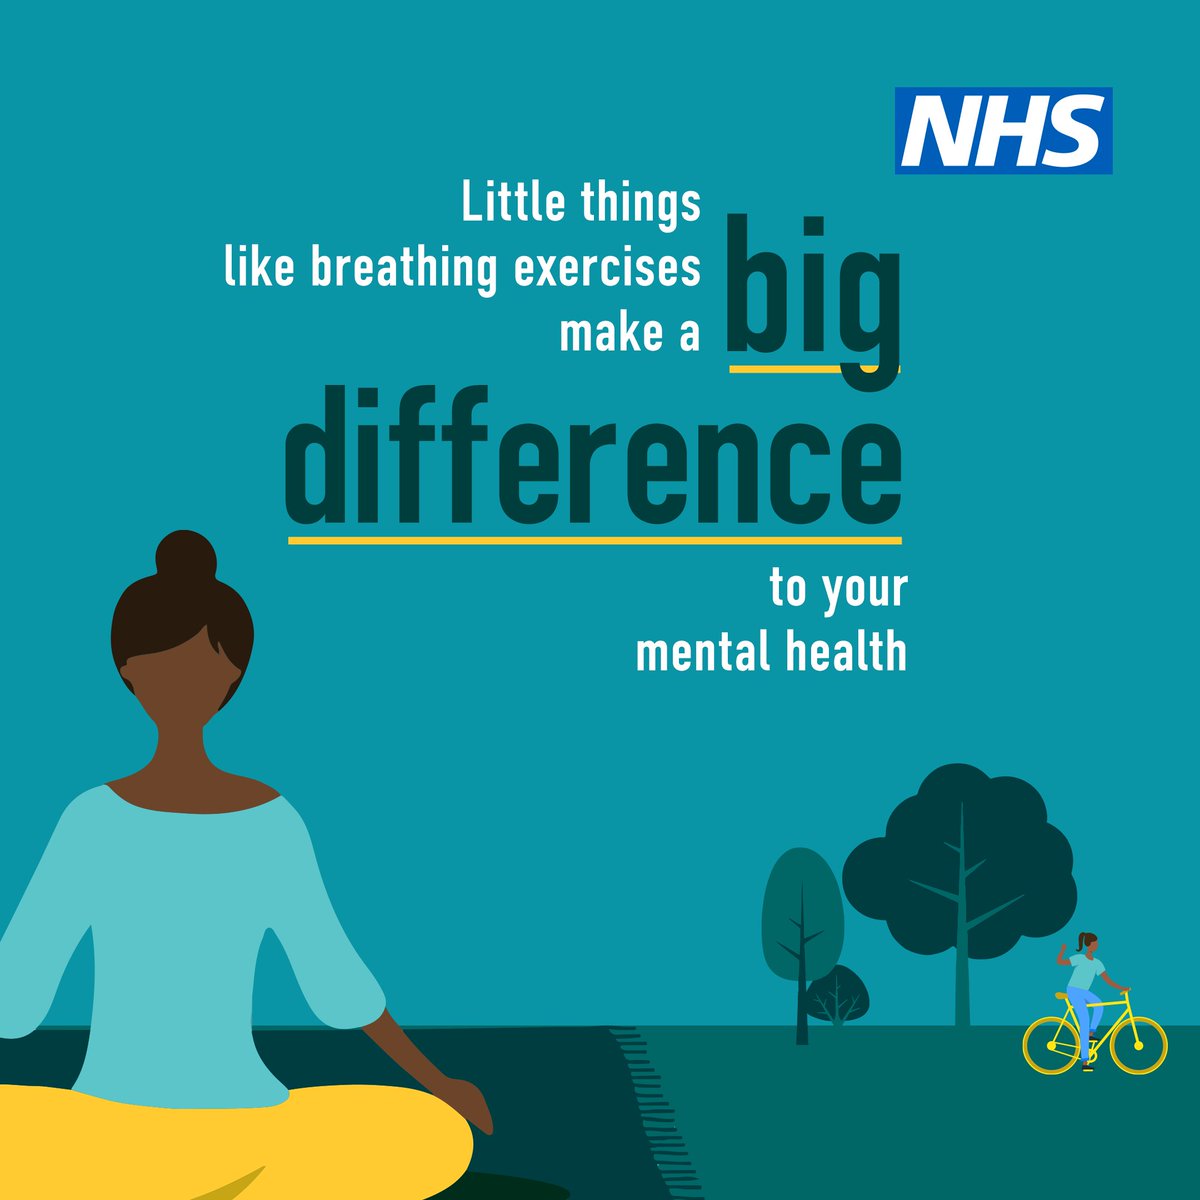 It's Mental Health Week💙

These little things can help manage your mental wellbeing:

🚶 Get physically active
💤Get the most from your sleep 
🌻 Get closer to nature
👭 Plan something nice to look forward to

- nhs.uk/every-mind-mat…
- nhs.uk/every-mind-mat…
#EveryMindMatters